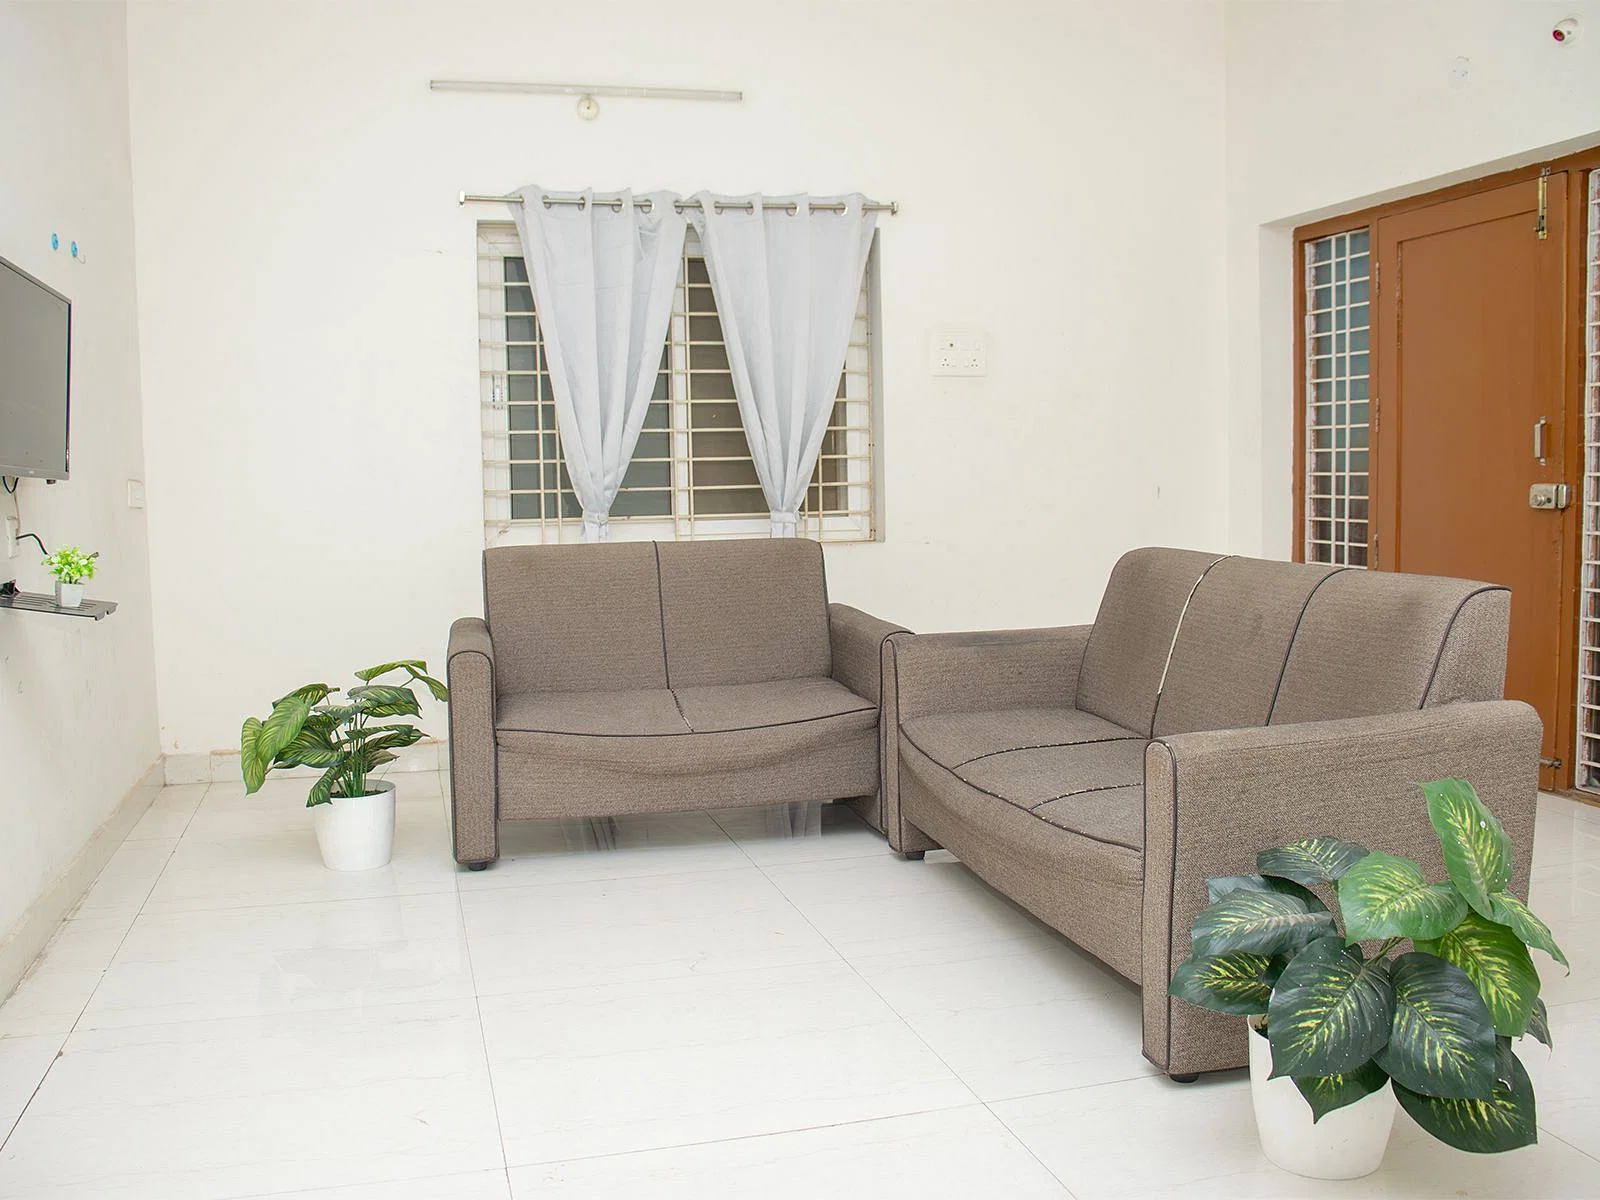 fully furnished Zolo single rooms for rent near me-check out now-Zolo Midway